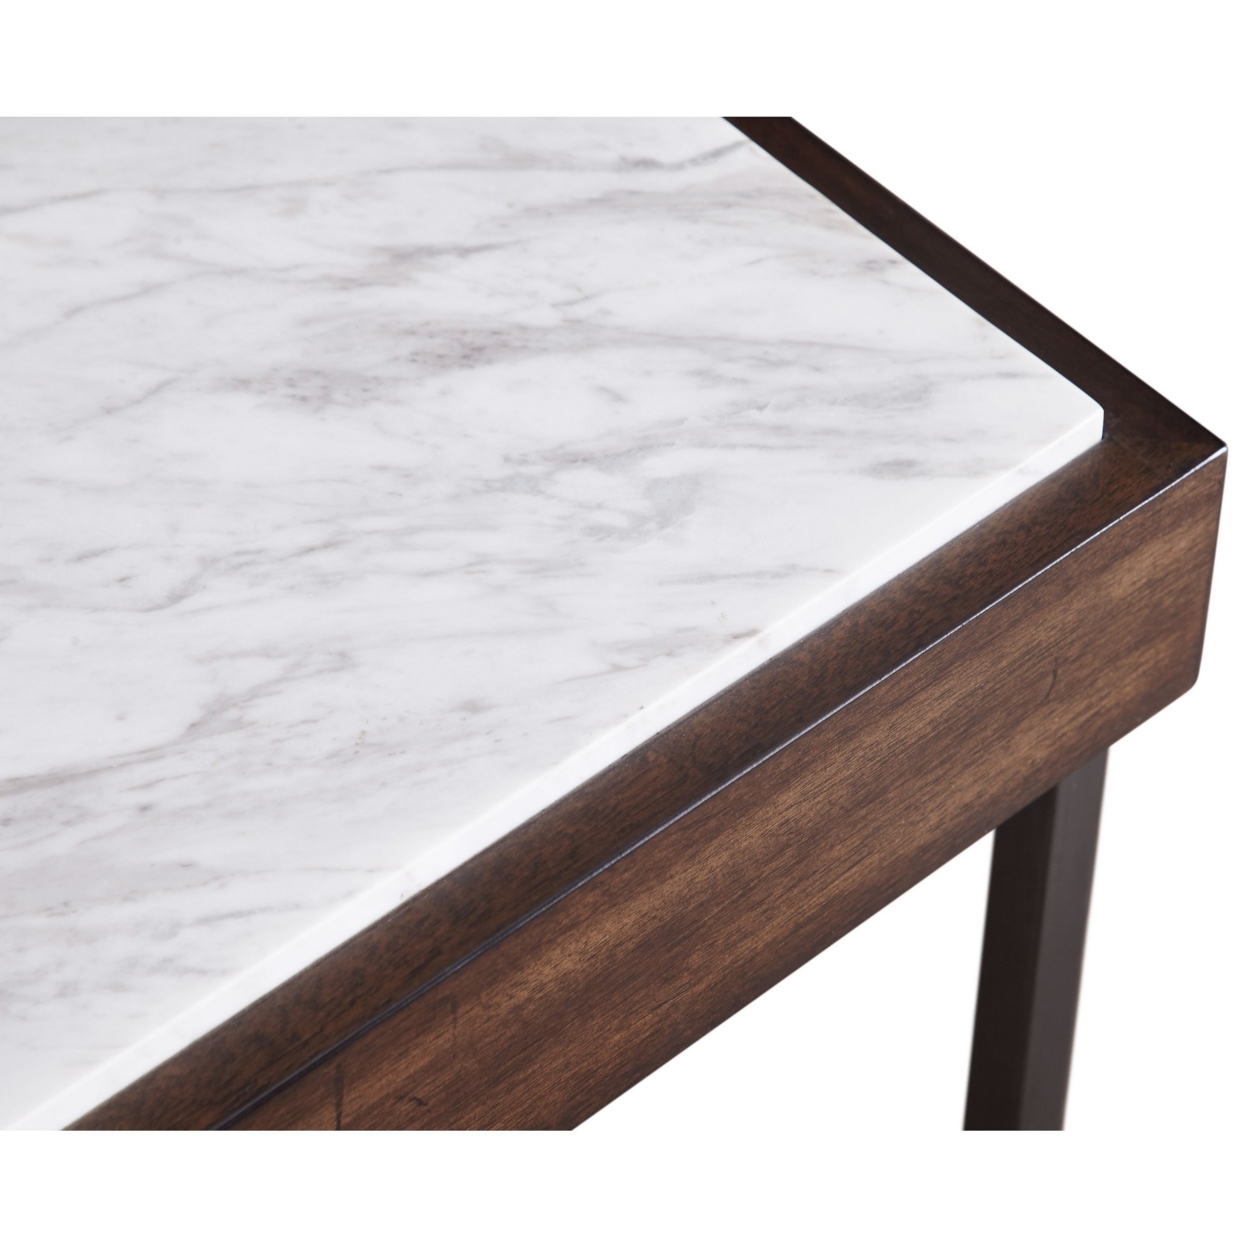 48 Inches Marble Top Console Table With Storage Slot, White And Brown- Saltoro Sherpi